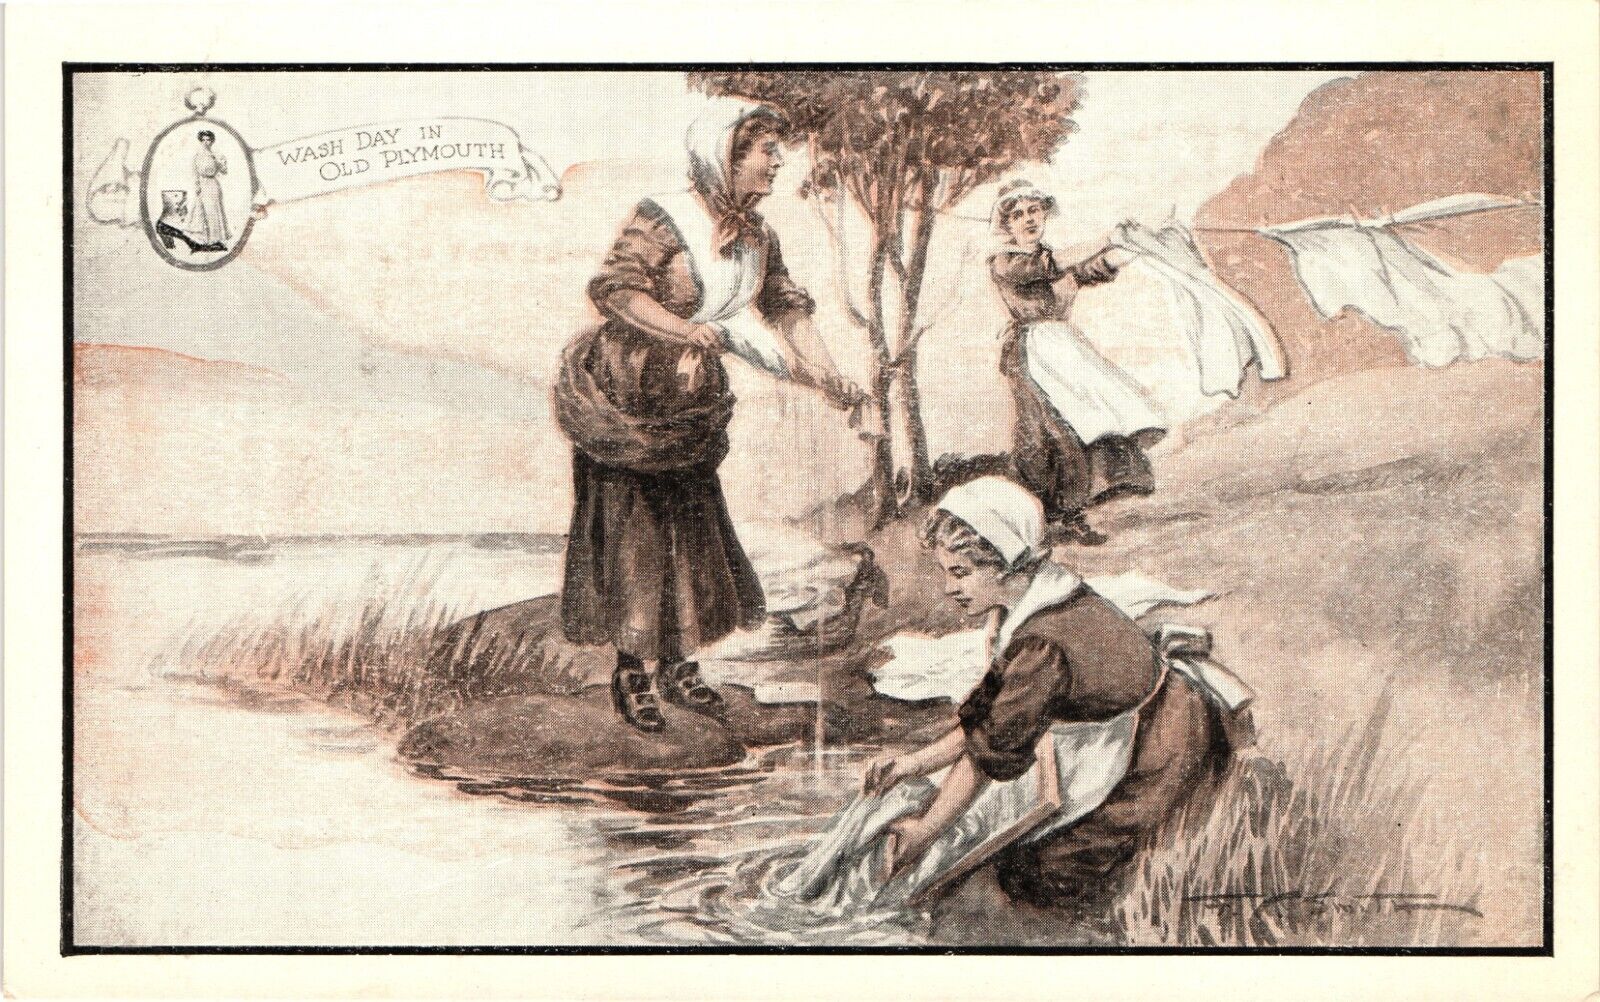 WASHING DAY IN OLD PLYMOUTH Pilgrims Walk Over Shoes Advertising Postcard